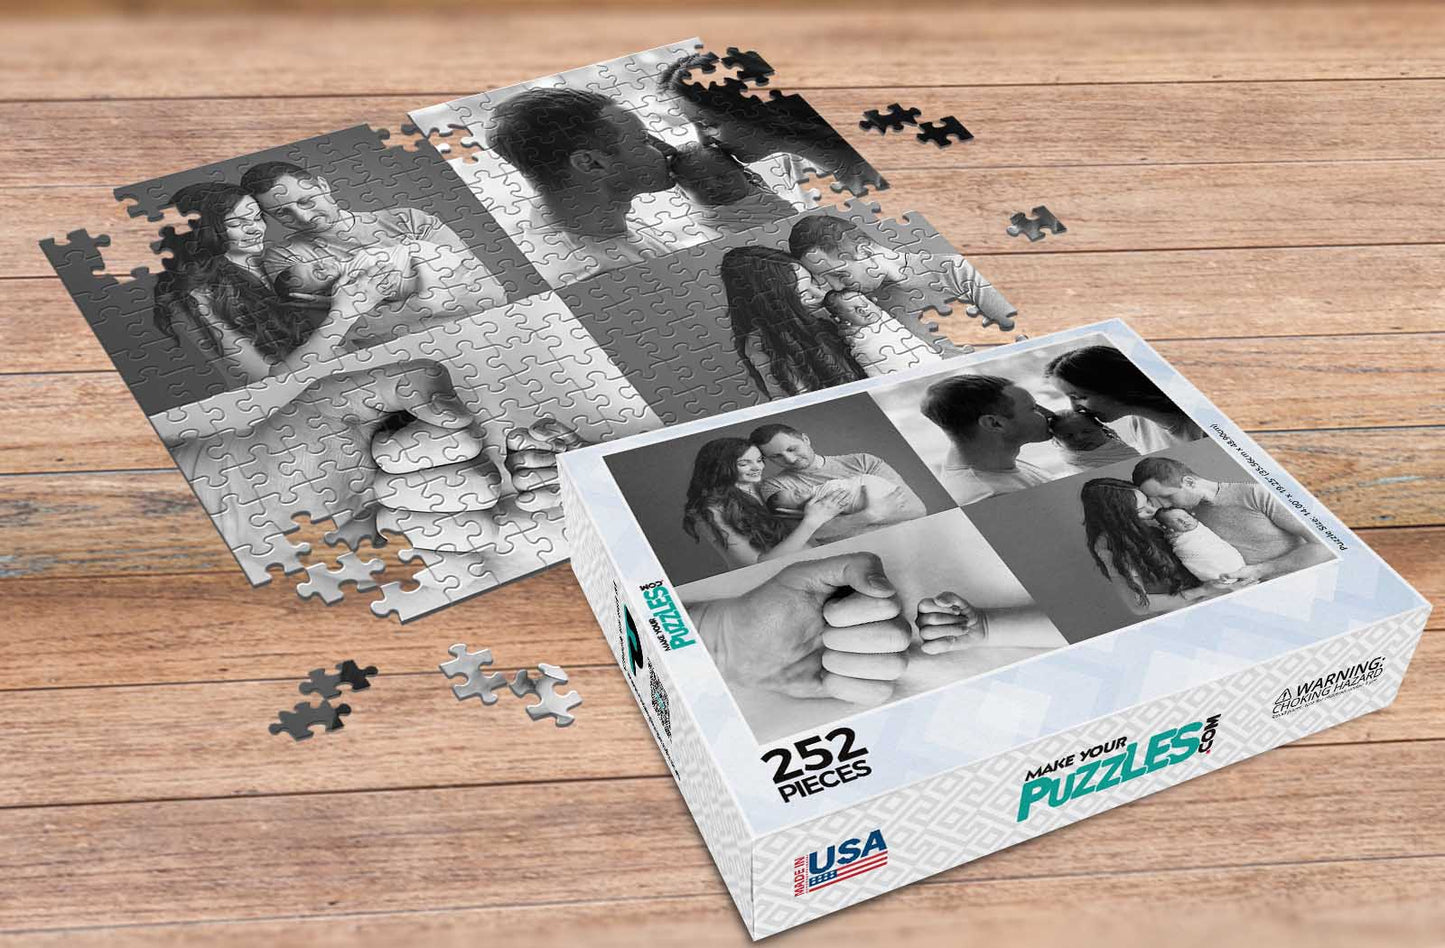 252 Piece Photo Collage Puzzle of young couple and newborn in black and white and custom puzzle box | Premium Collage Photo Puzzles Made in the USA | Make Your Own Puzzle at MakeYourPuzzles